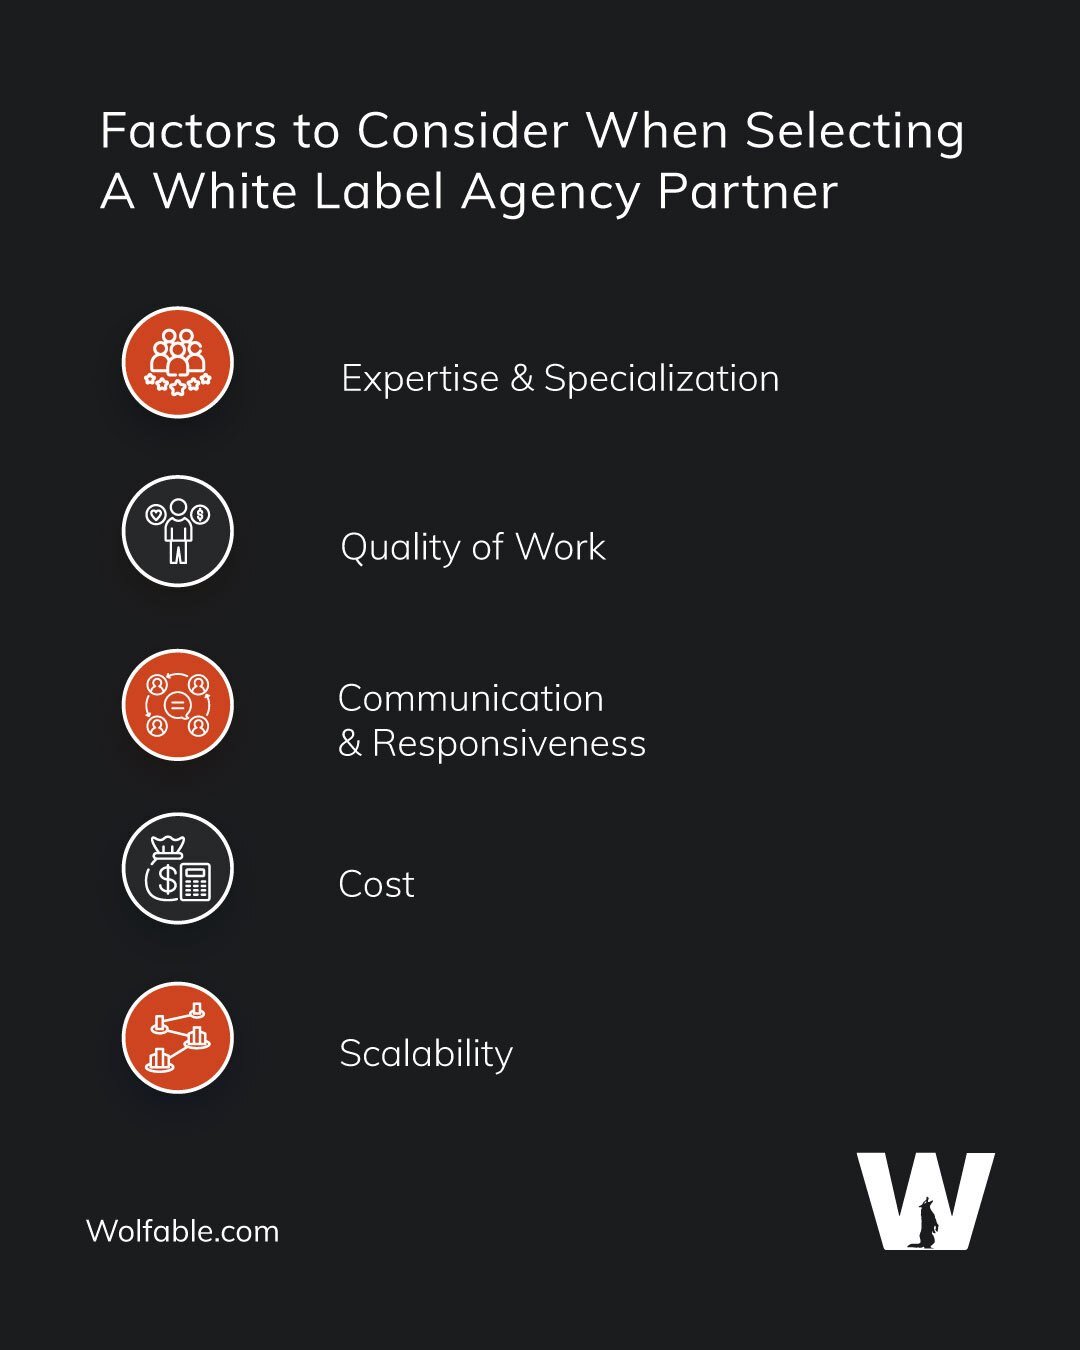 Factors-to-consider-when-selecting-white-label-agency